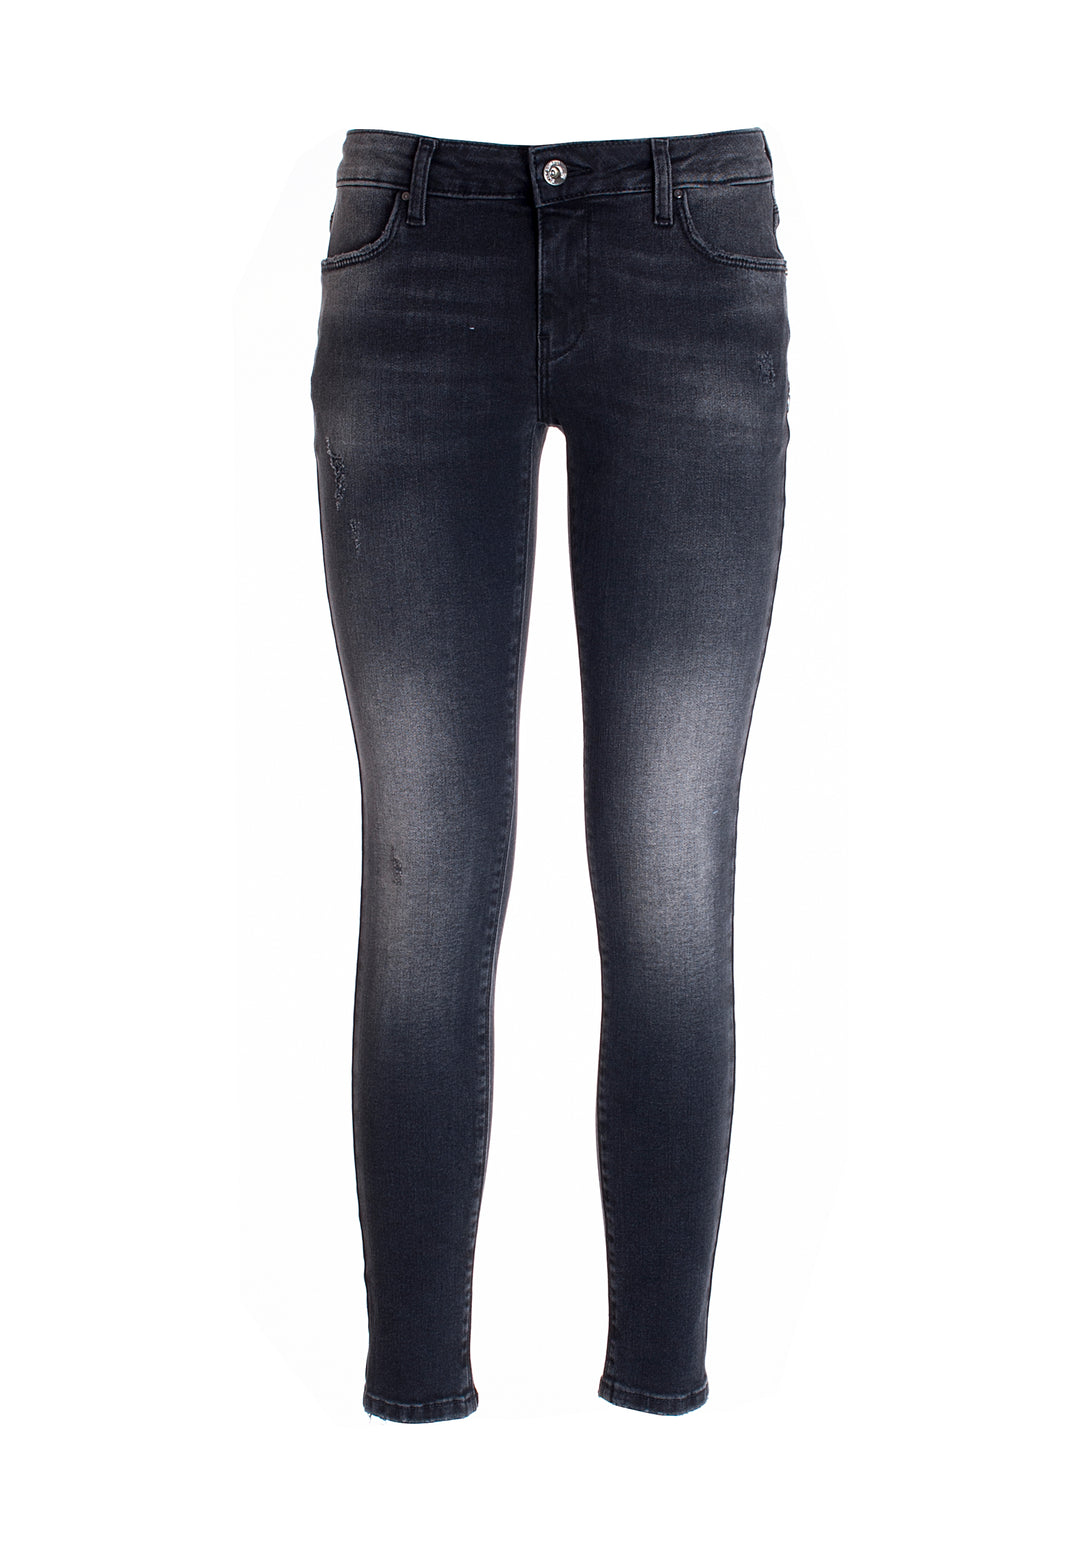 Jeans skinny fit made in black stretch denim with middle wash